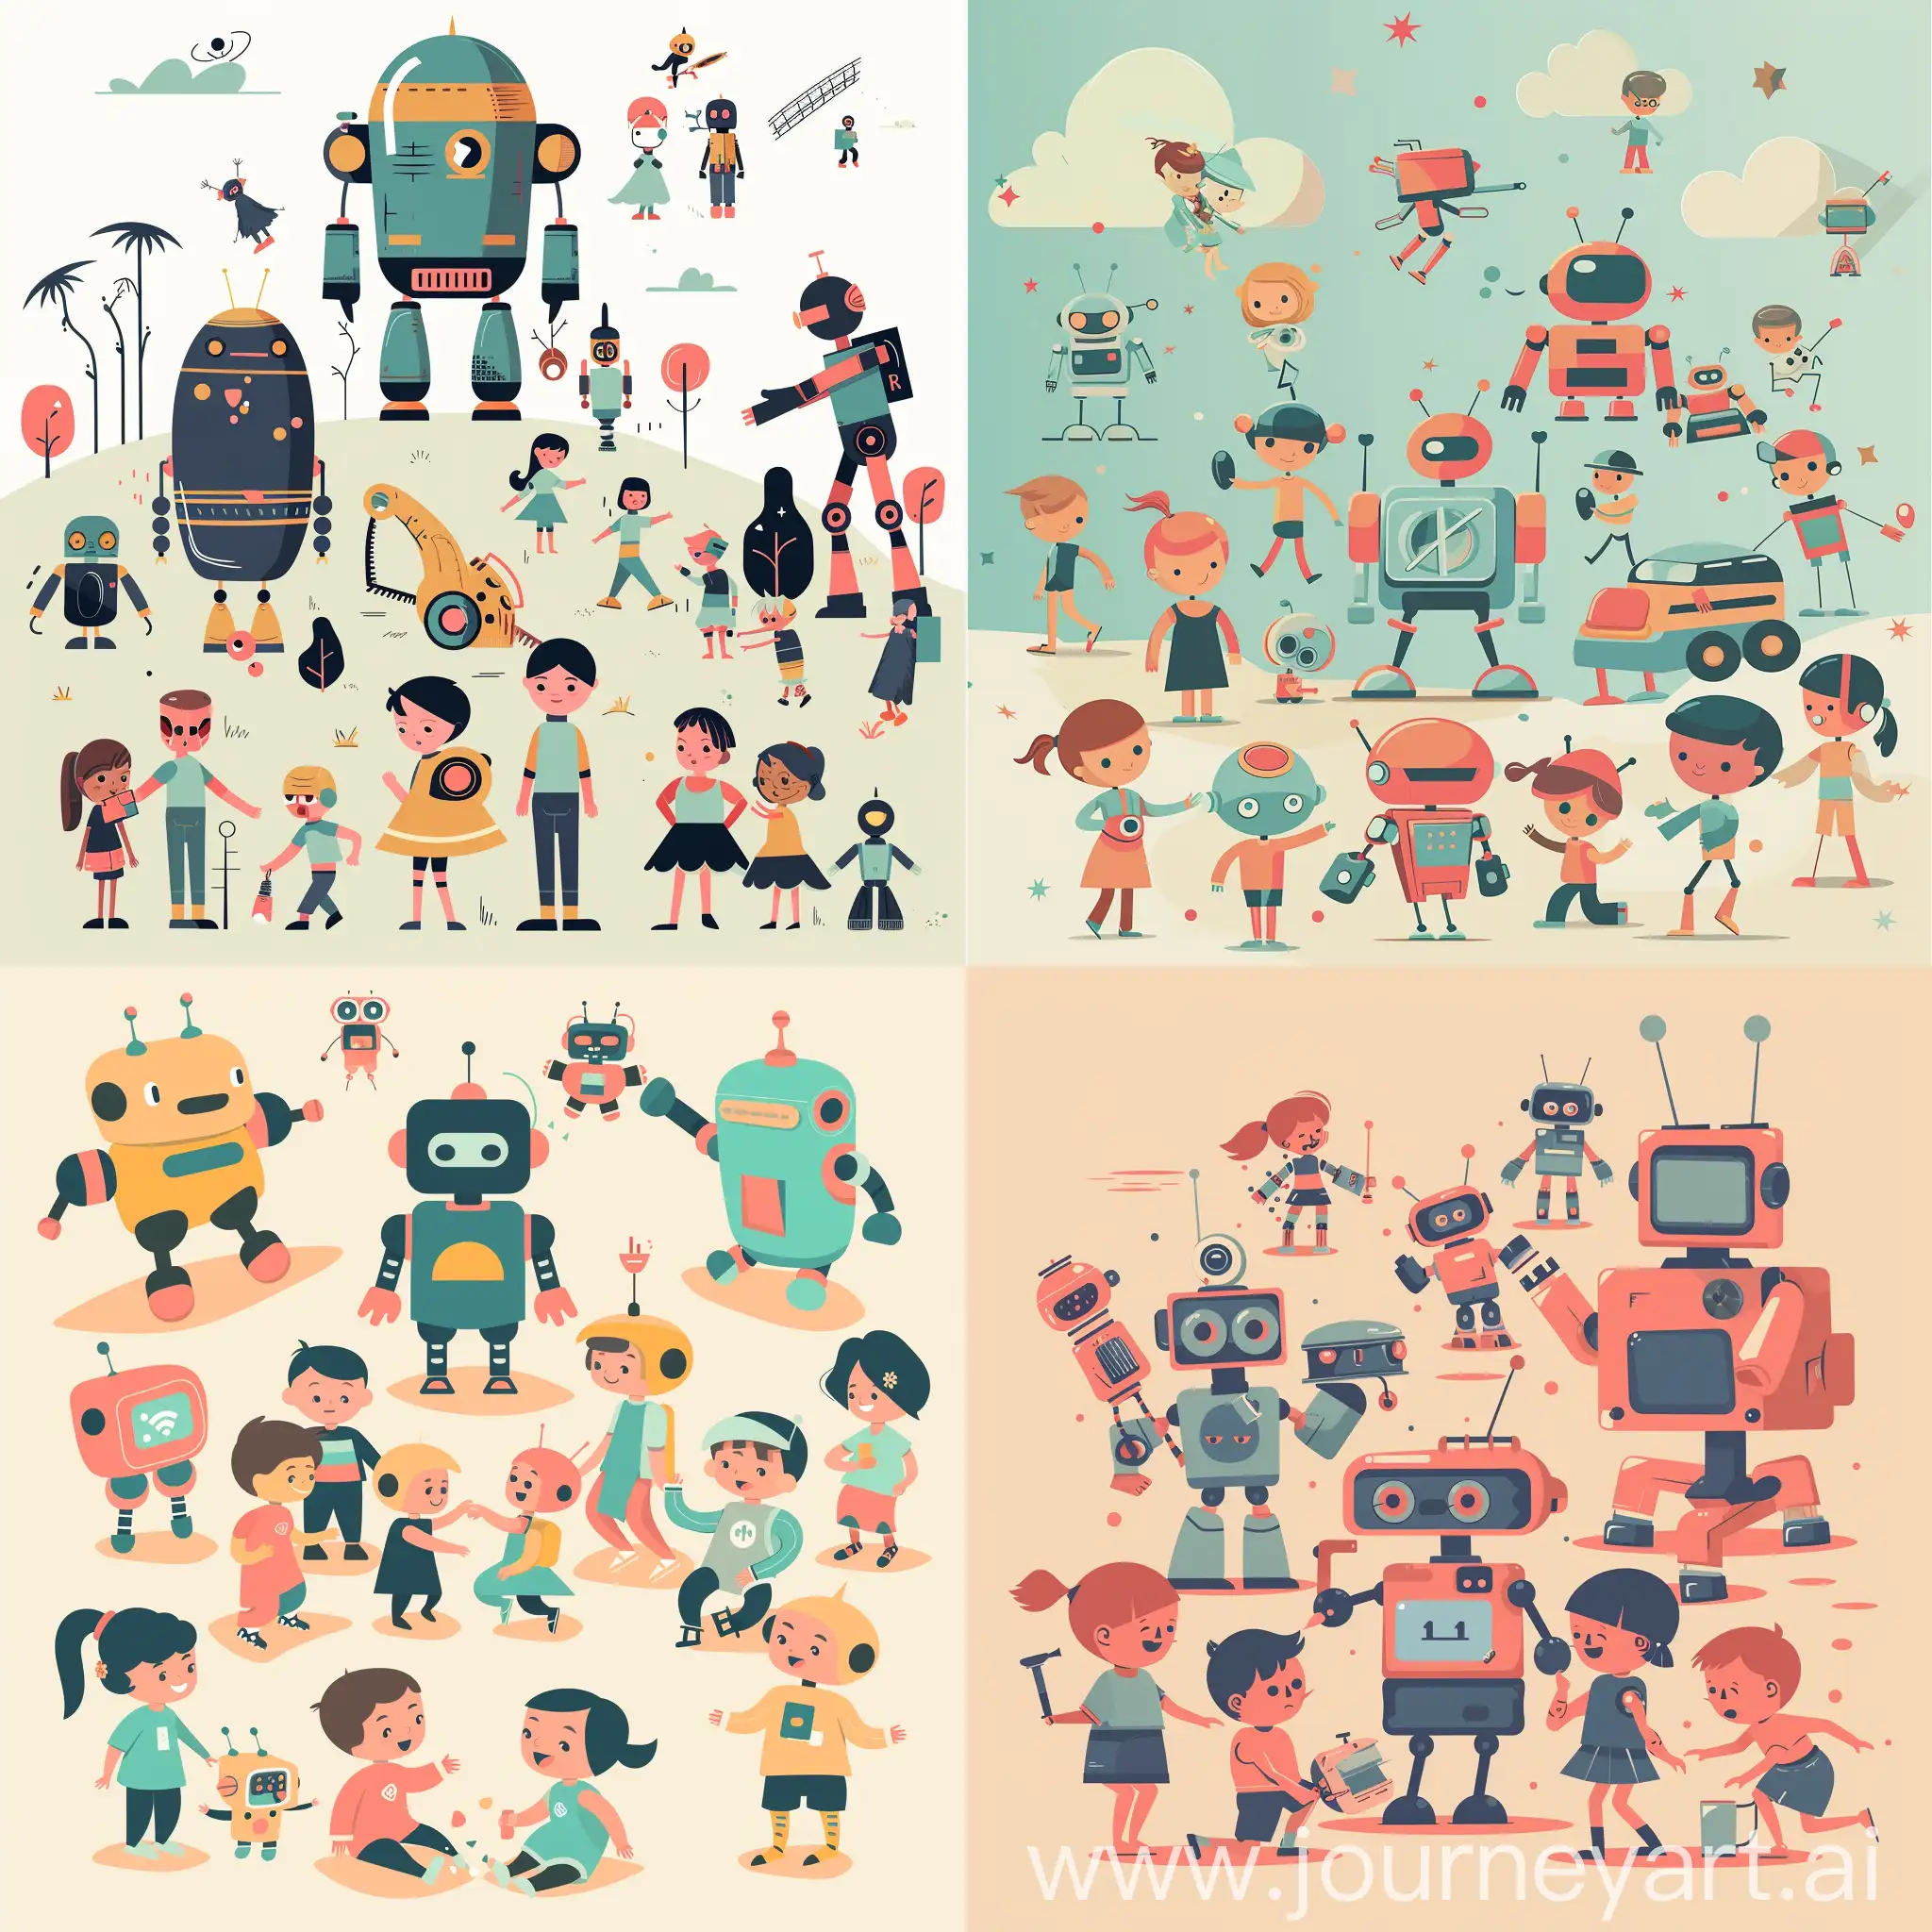 Robots-and-Children-Playing-Together-in-Flat-Style-Illustration